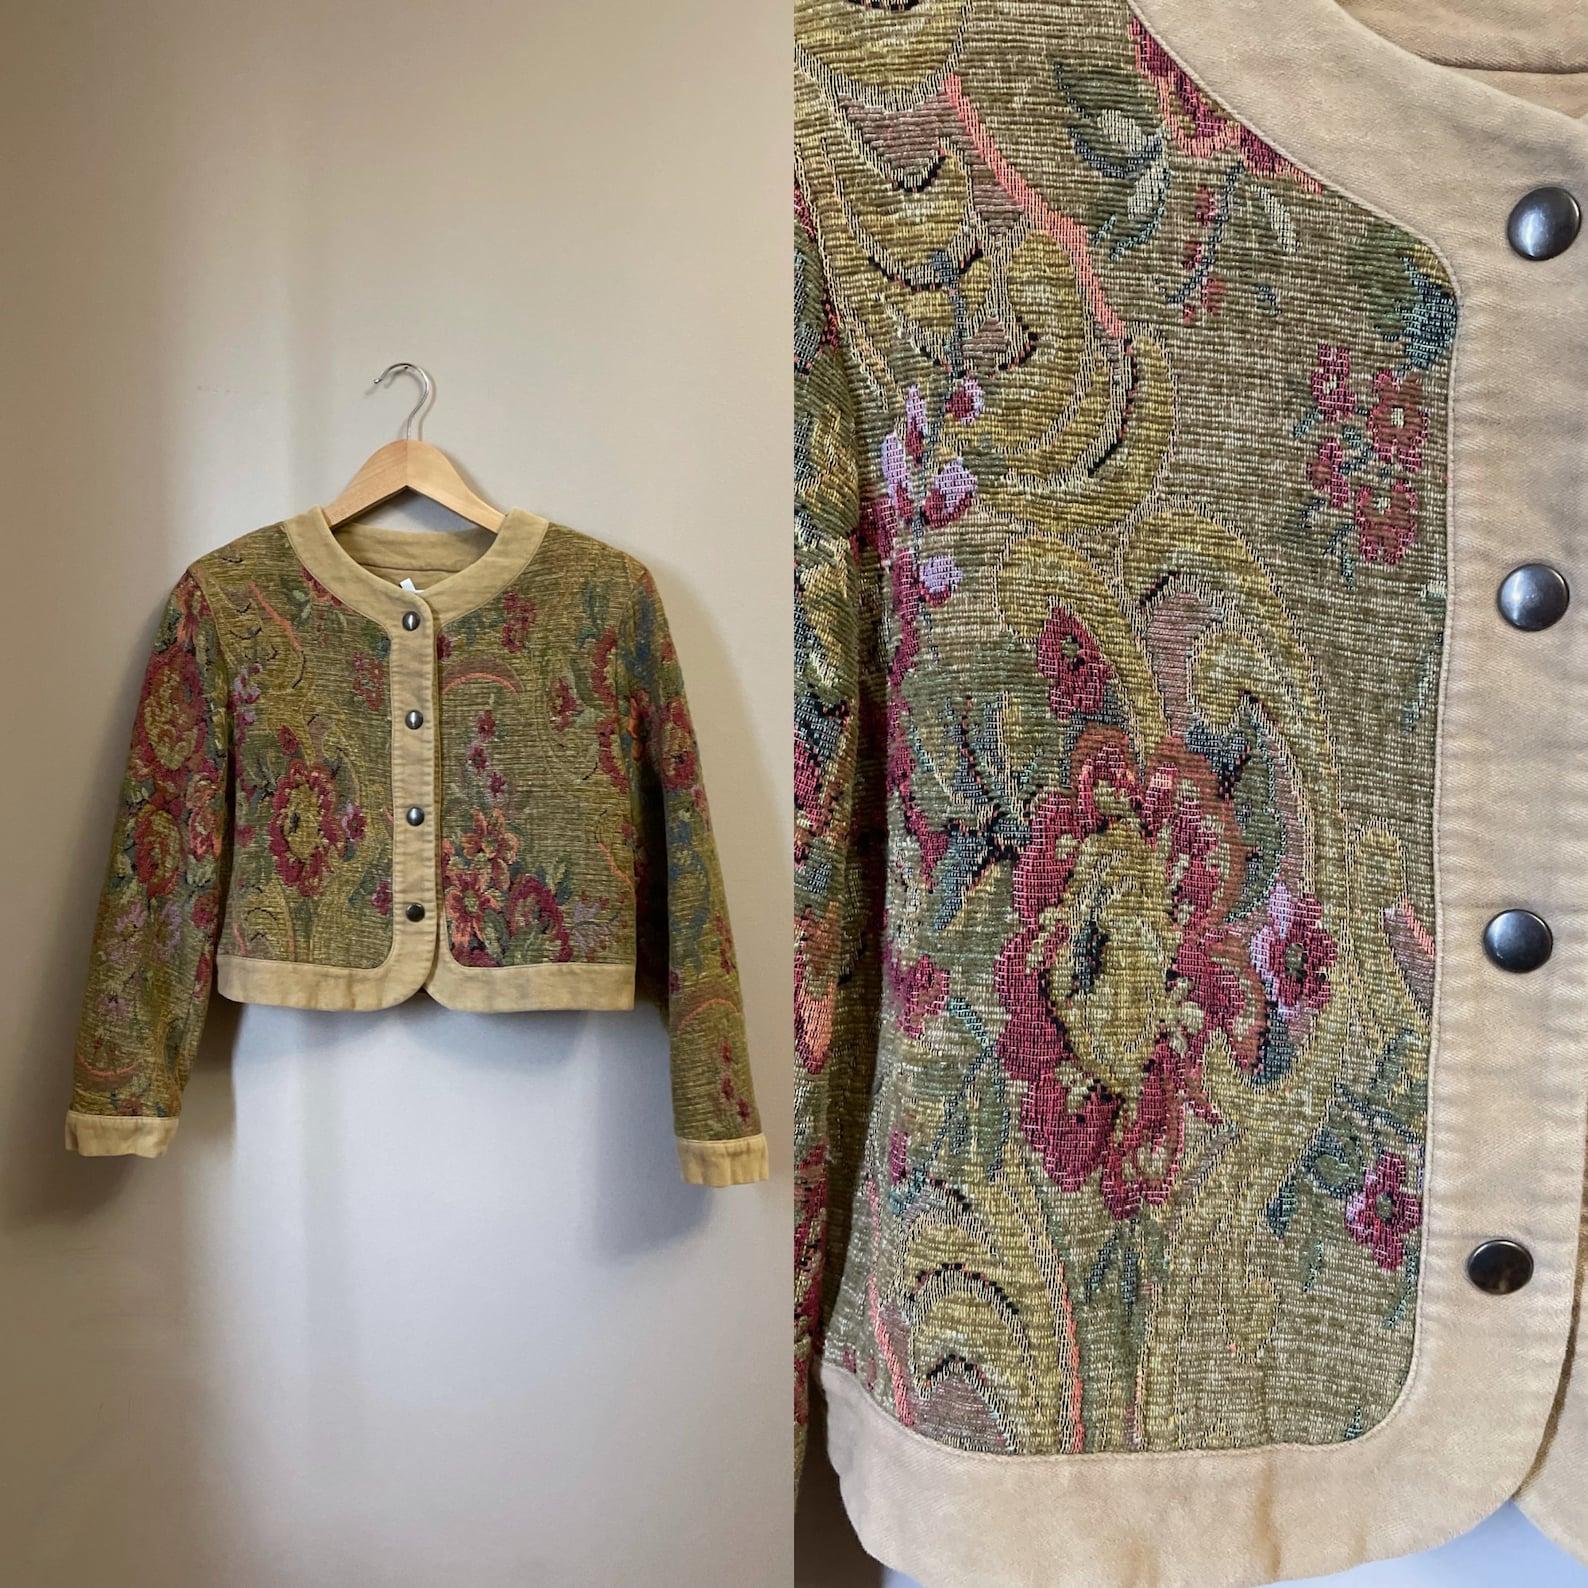 Vintage Byblos floral & paisley cropped jacket. round collar. solid camel beige placket, collar and cuffs. snap button closure

Circa: 1990s
Byblos - Made in Italy
Tagged Size 42
Camel Beige/Muted Green/Maroon
Condition: Excellent! The Byblos label